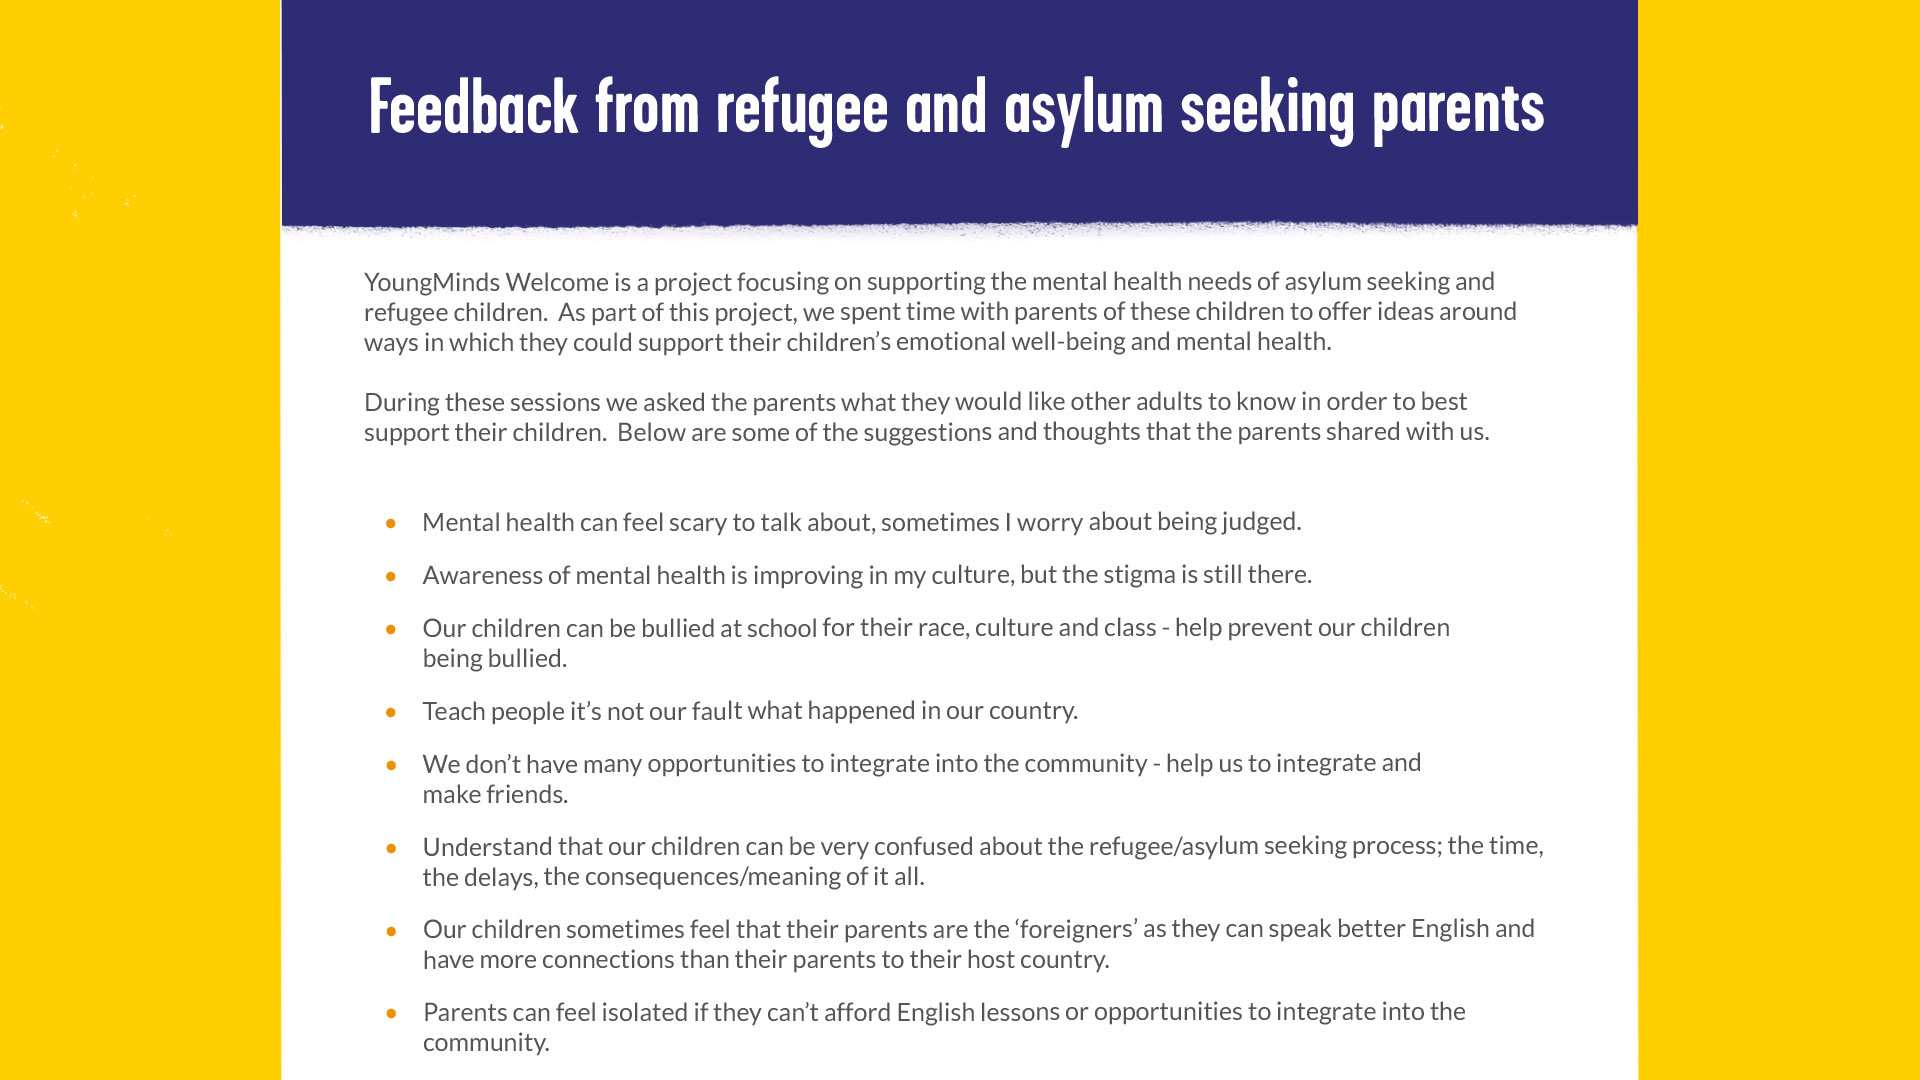 A screenshot of our resource feedback from refugee and asylum seeking parents.